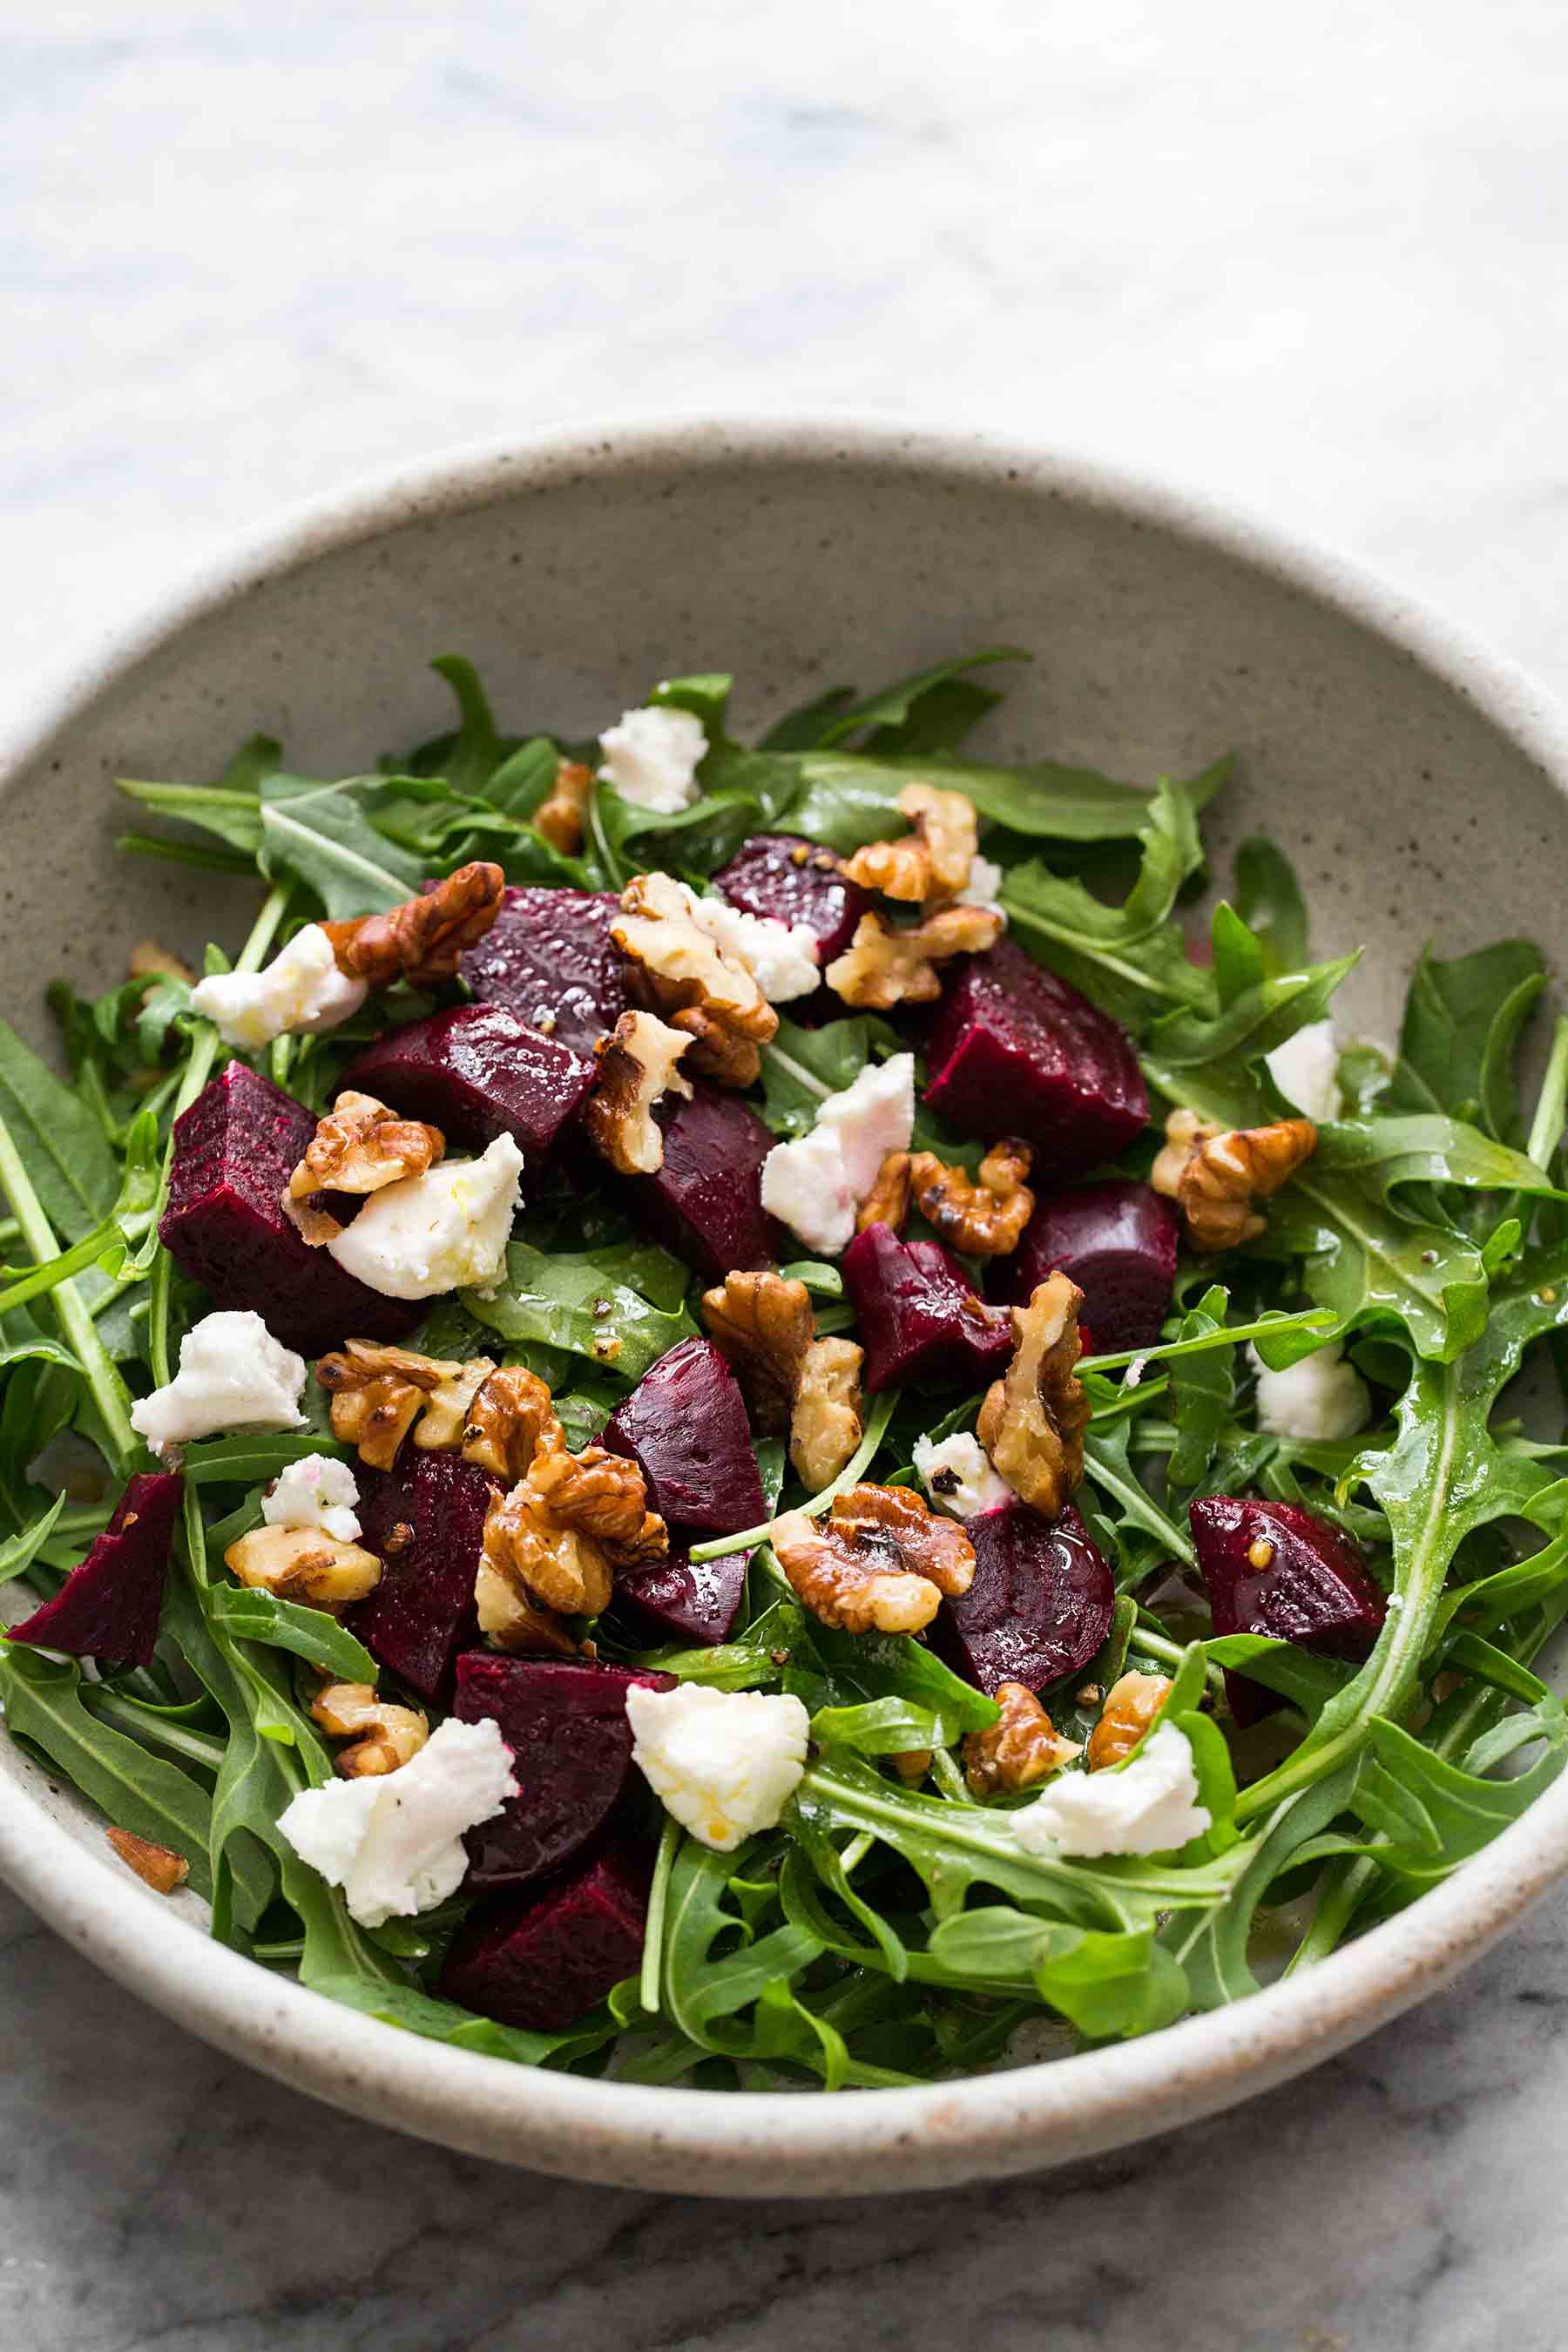 Arugula Salad with Beets and Goat Cheese – PinLaVie.com